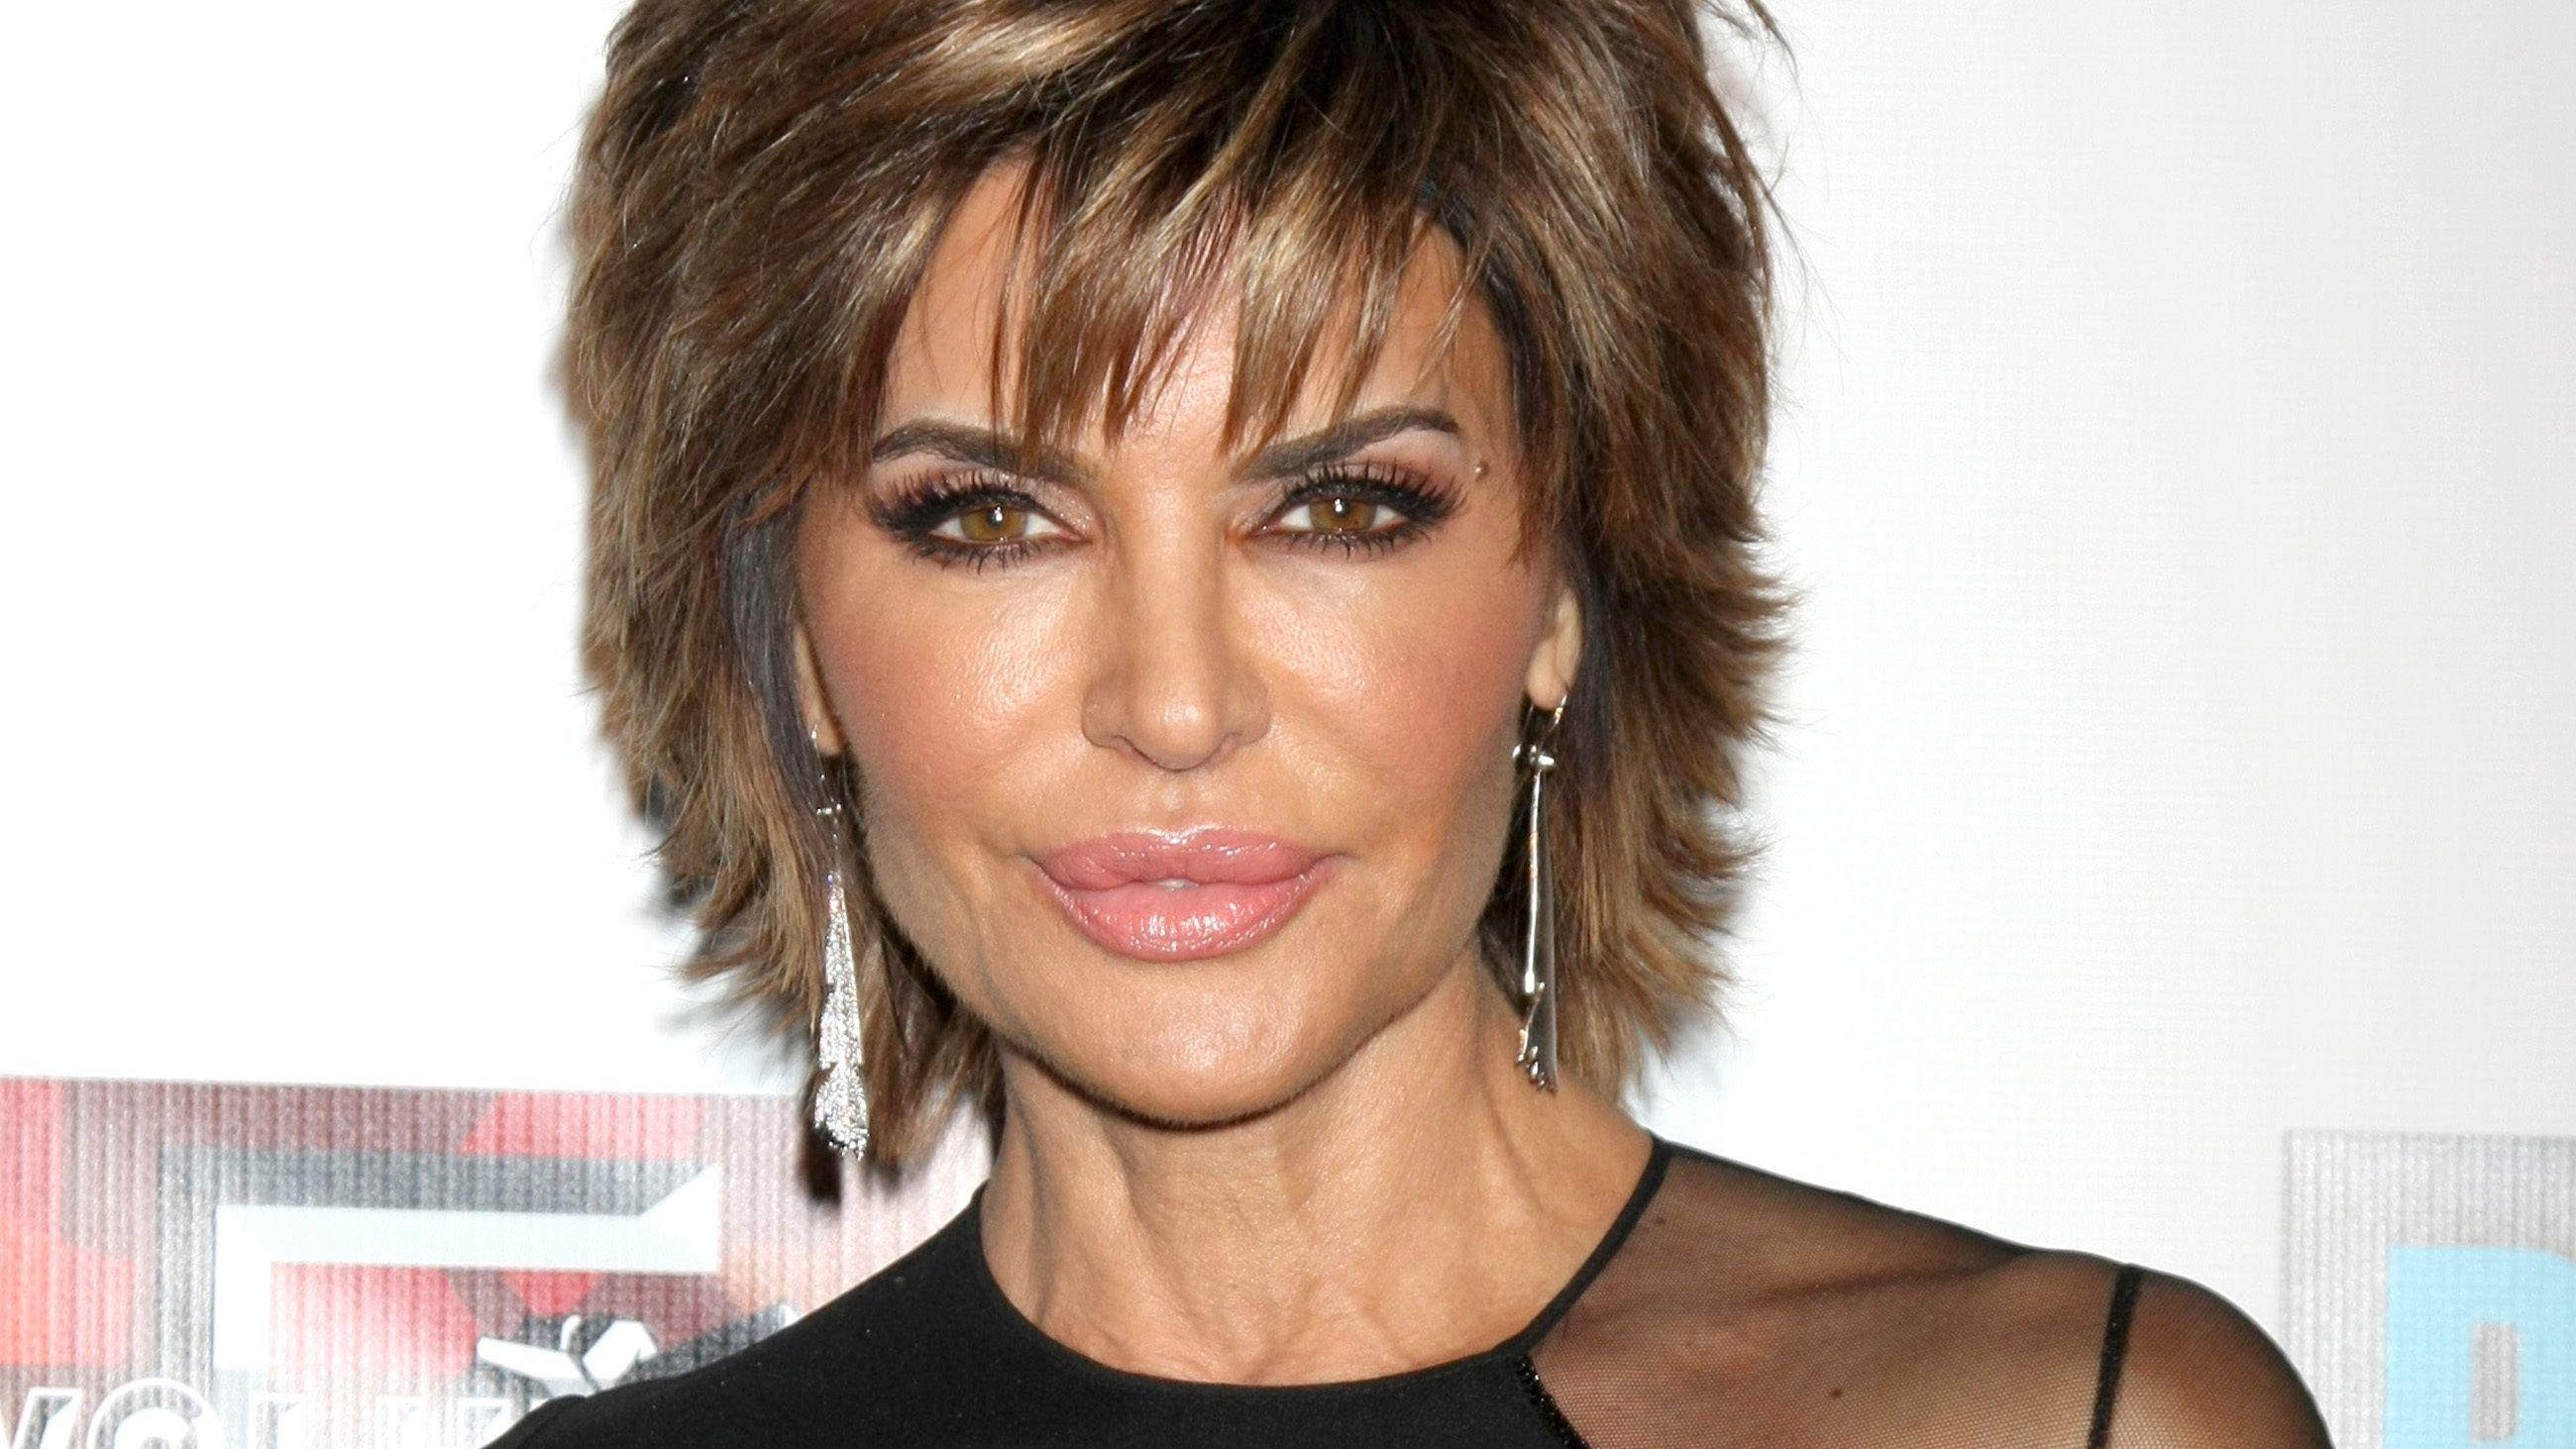 Lisa Rinna with signature hairstyle and dangling earrings